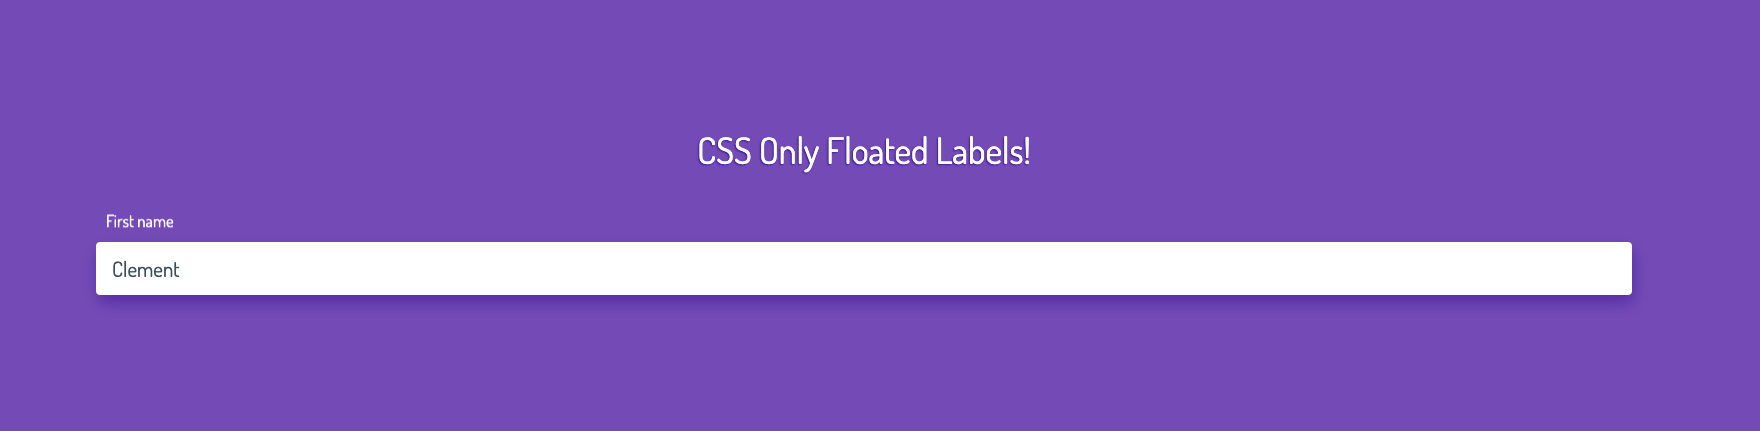 CSS ONLY FLOAT LABEL